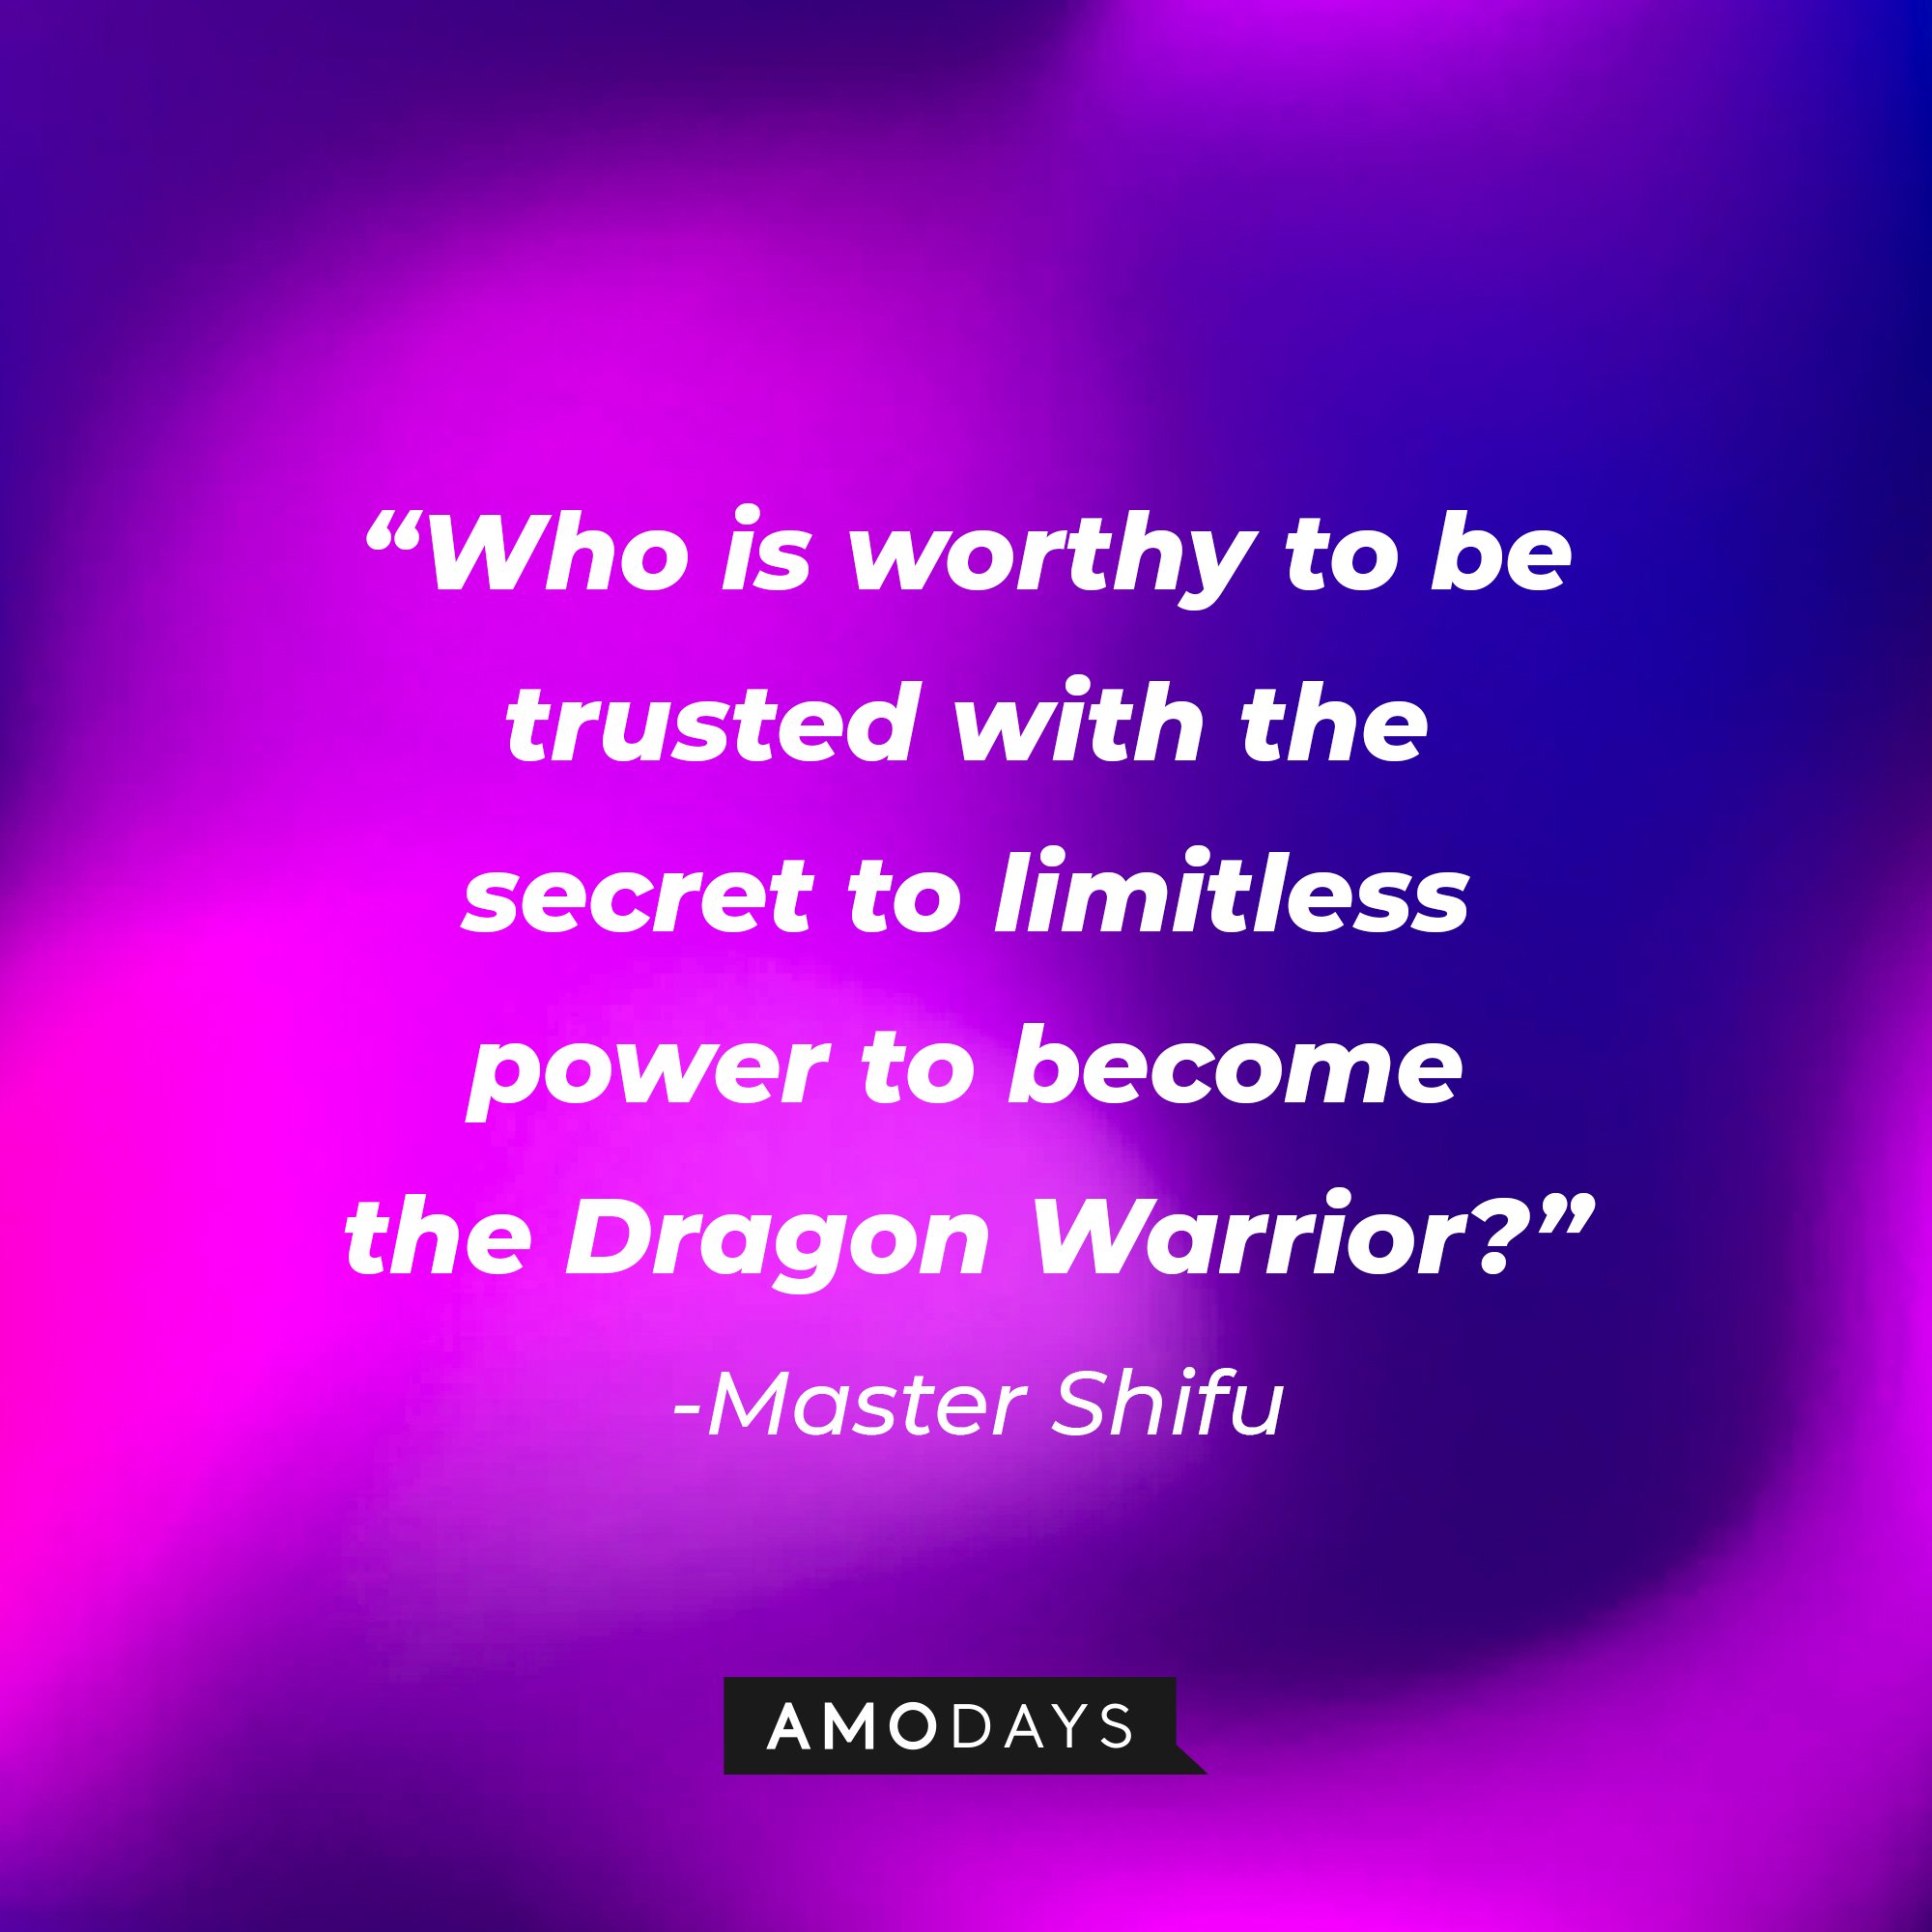 Master Shifu's quote: “Who is worthy to be trusted with the secret to limitless power to become the Dragon Warrior?” | Image: AmoDays